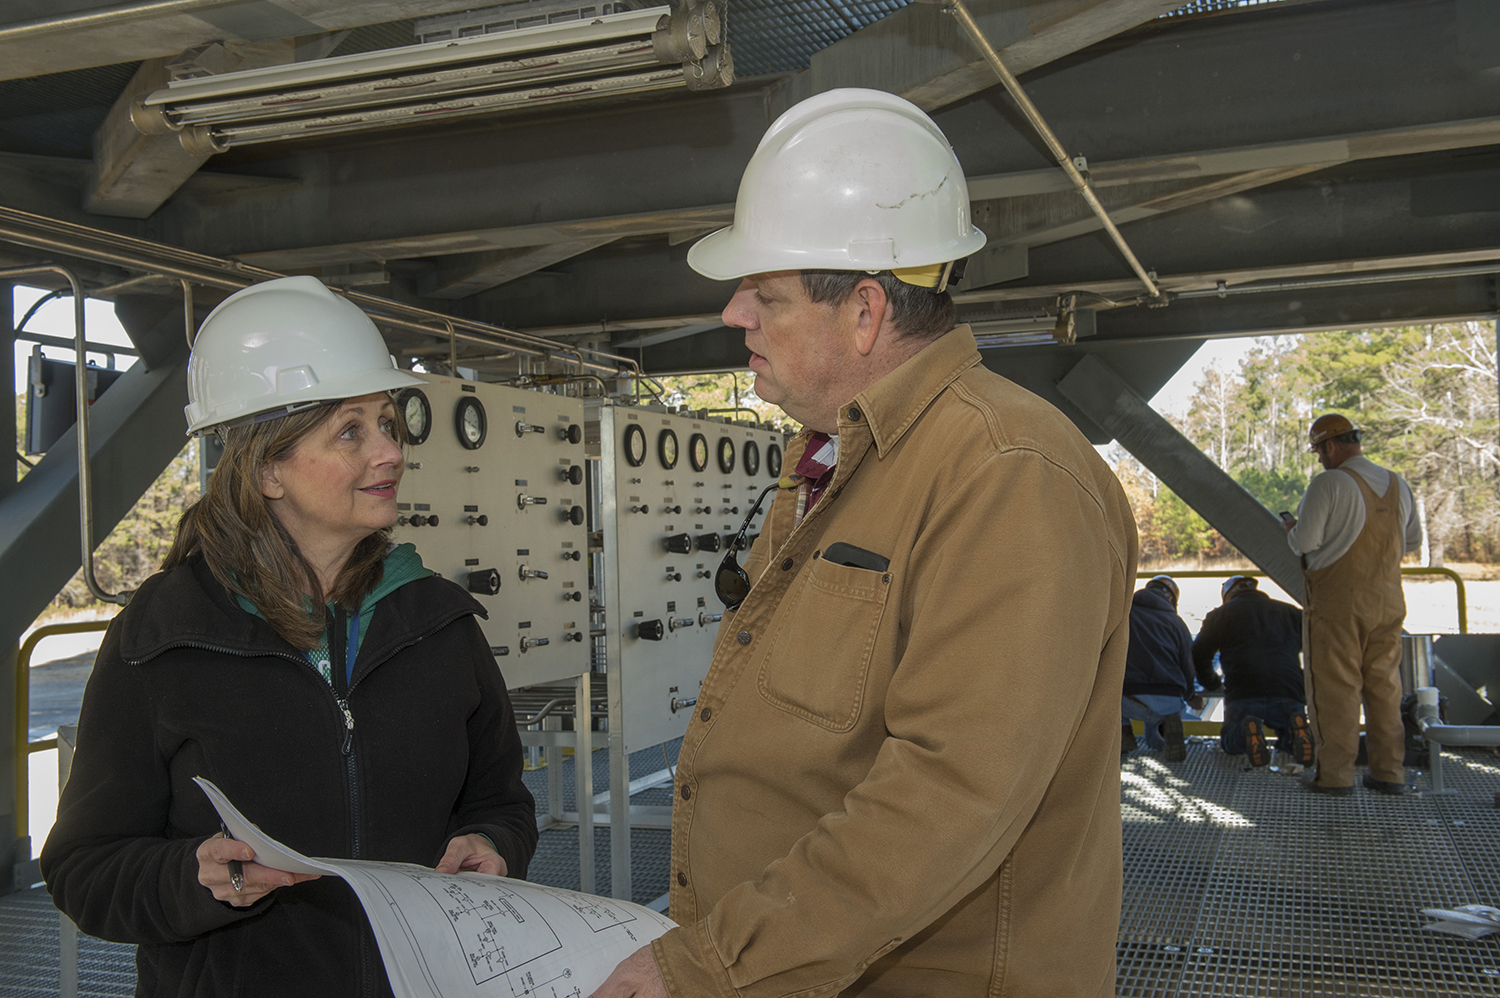 Tara Marshall, left, talks about the installation of a pressurization control panel at Test Stand 4693 with Mike Nichols.